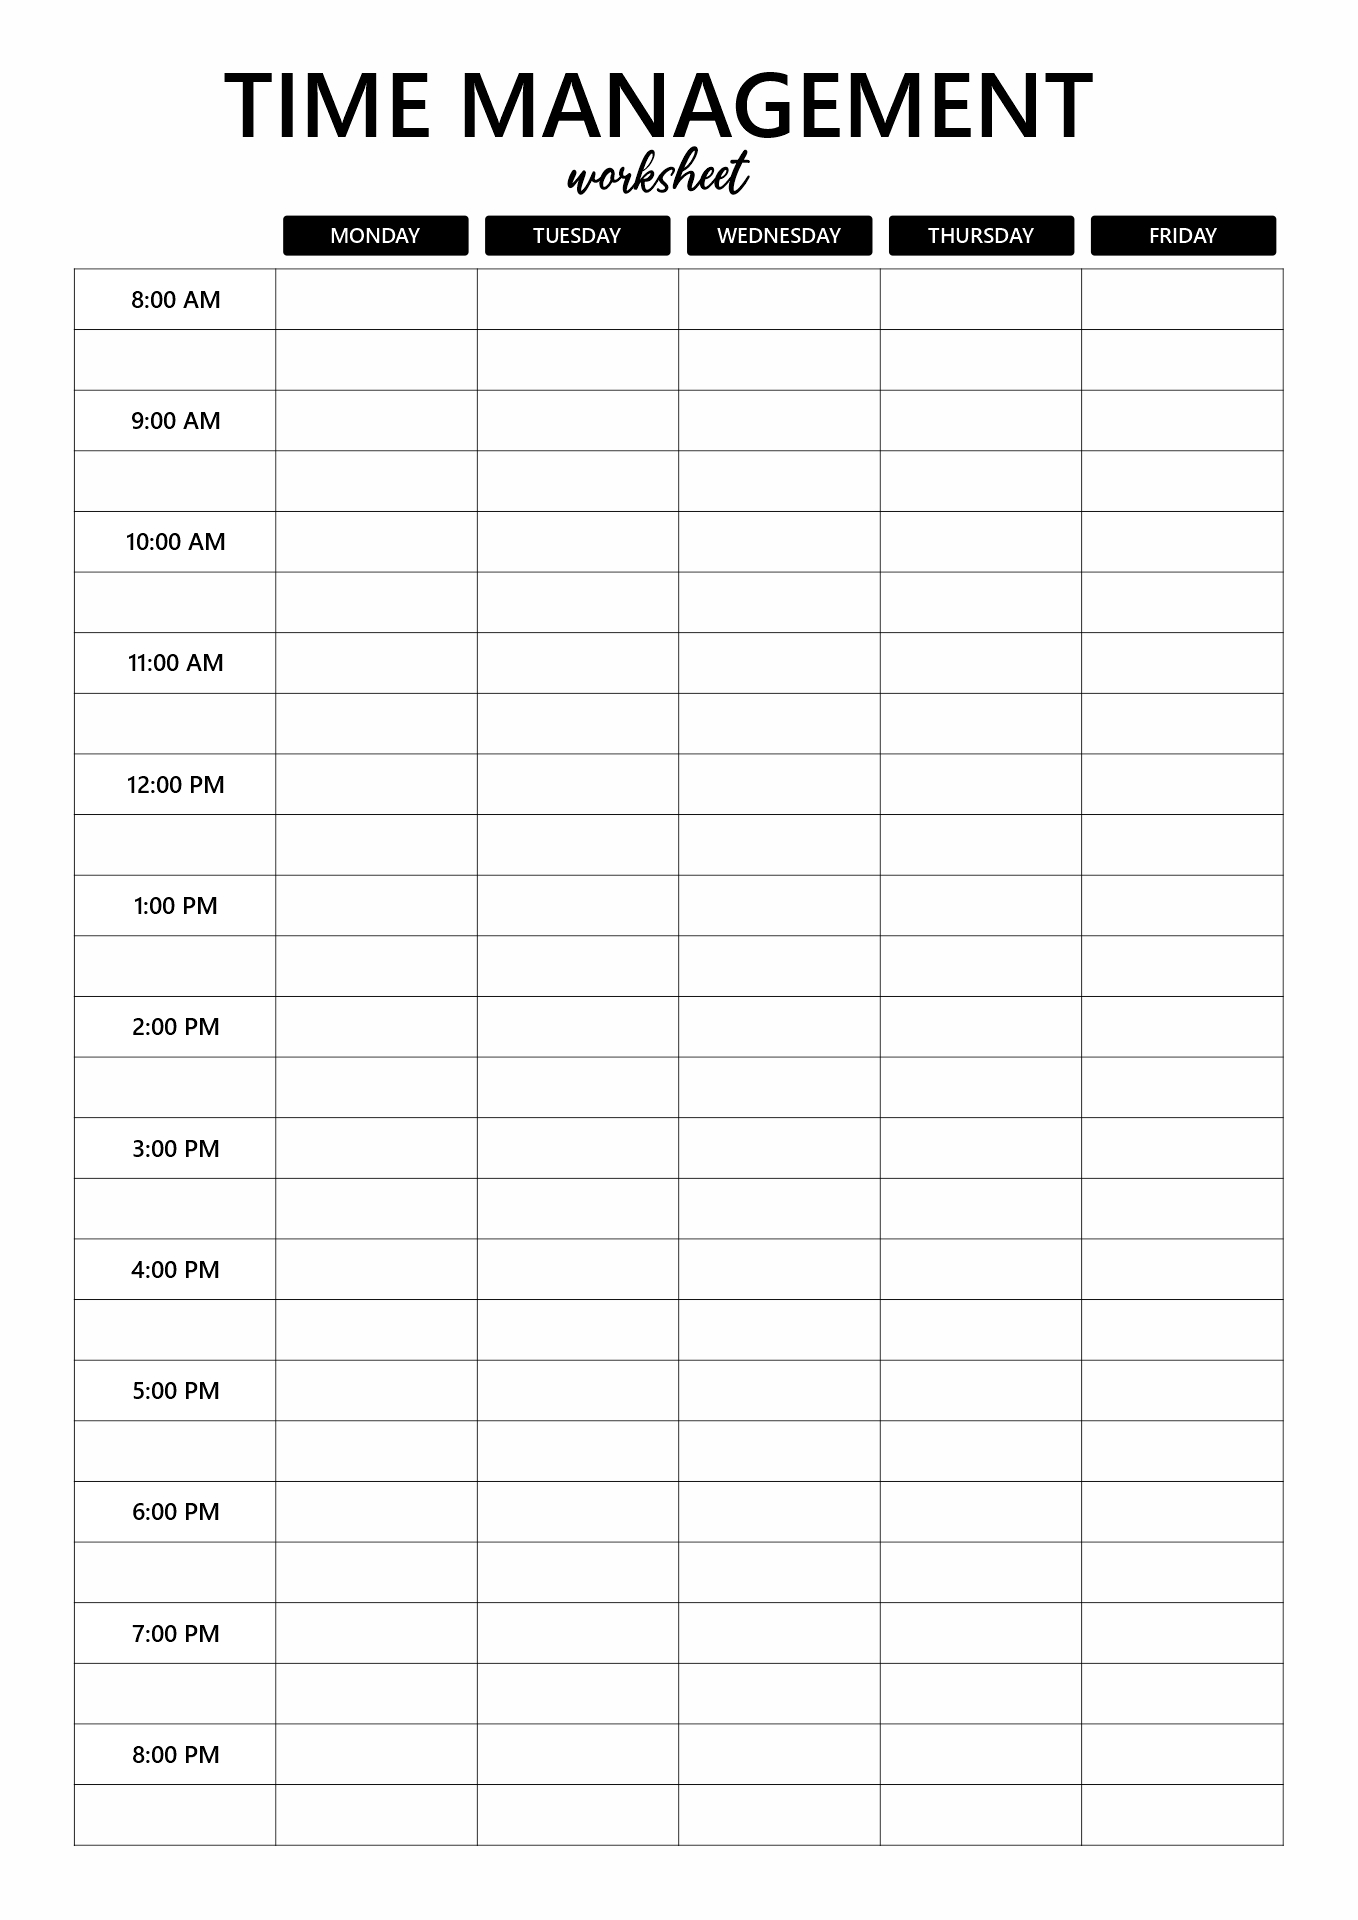 18 Best Images of Time Management Schedule Worksheets ...